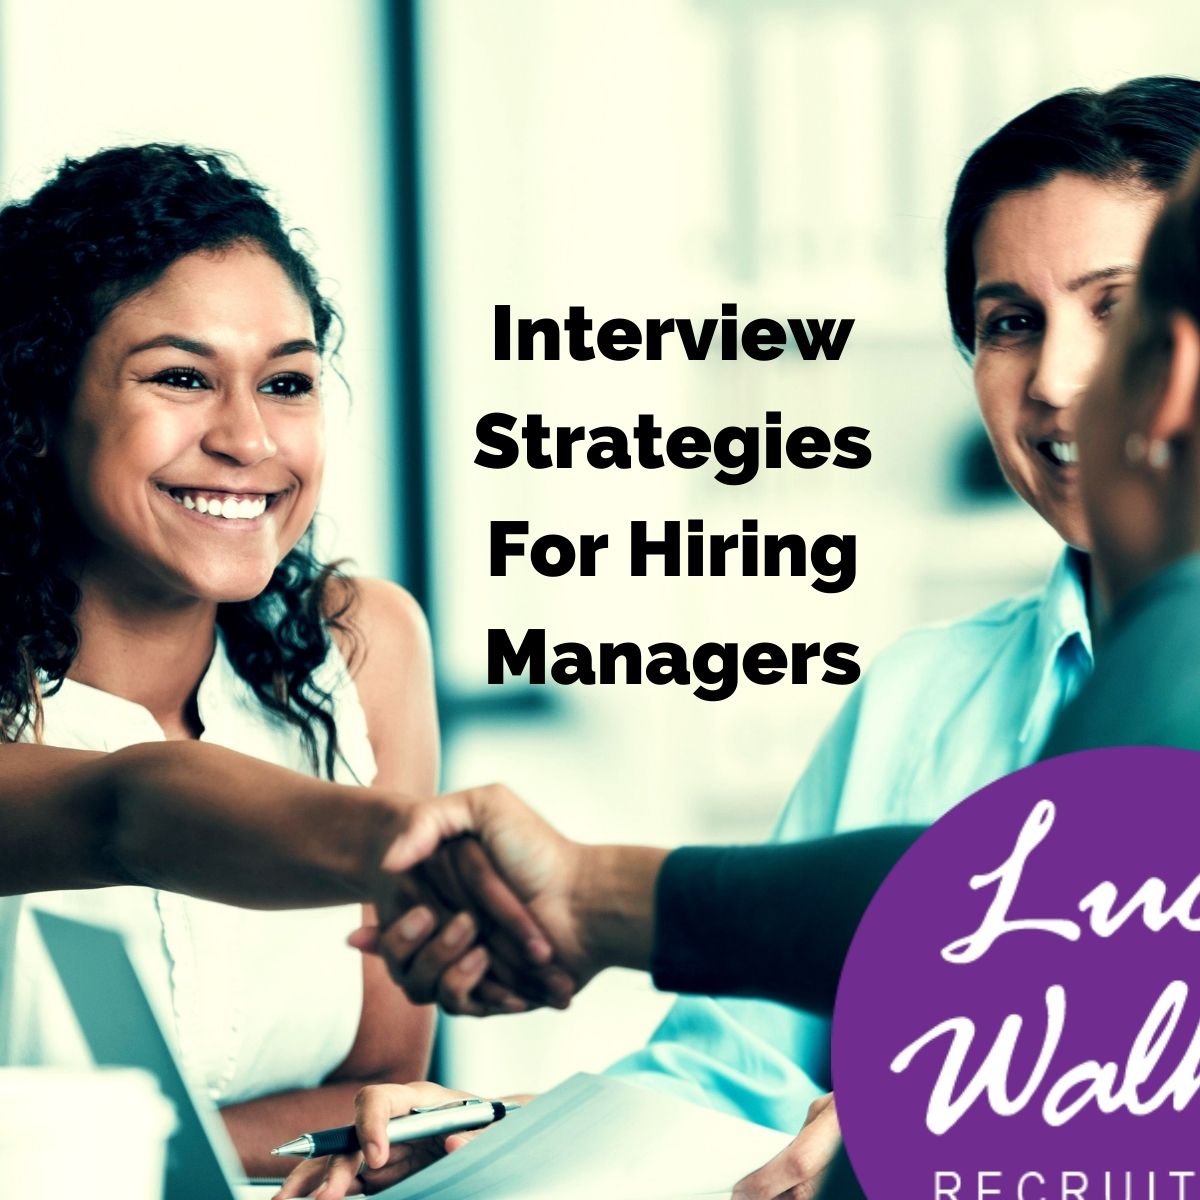 Easy to Action Interview Strategies for Hiring Managers